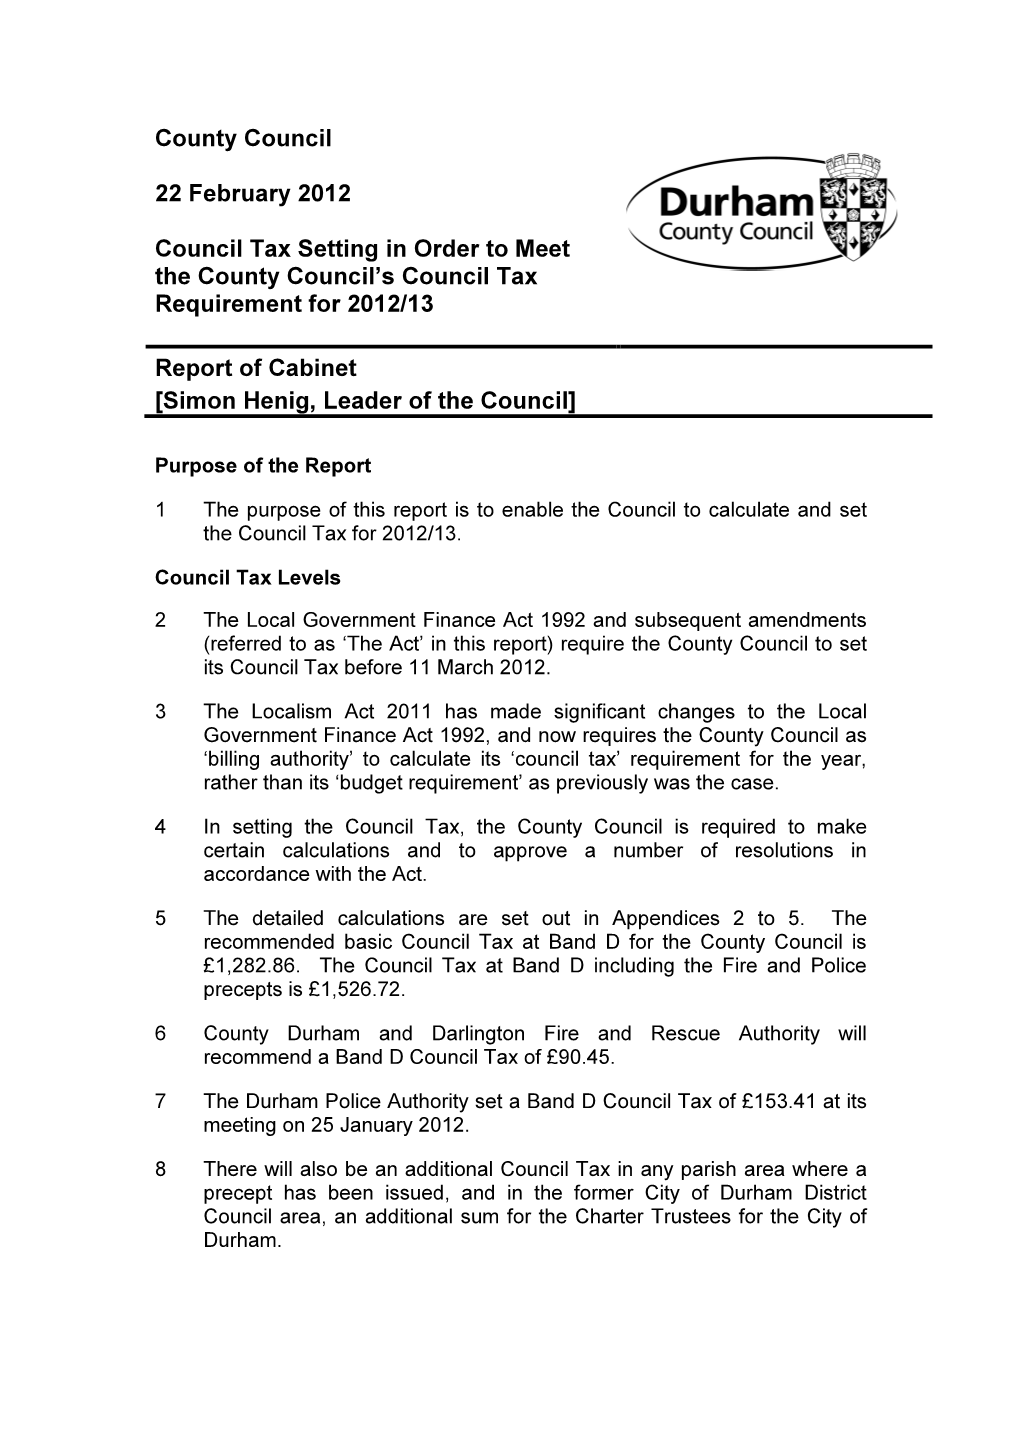 Council Tax Setting in Order to Meet the County Council’S Council Tax Requirement for 2012/13